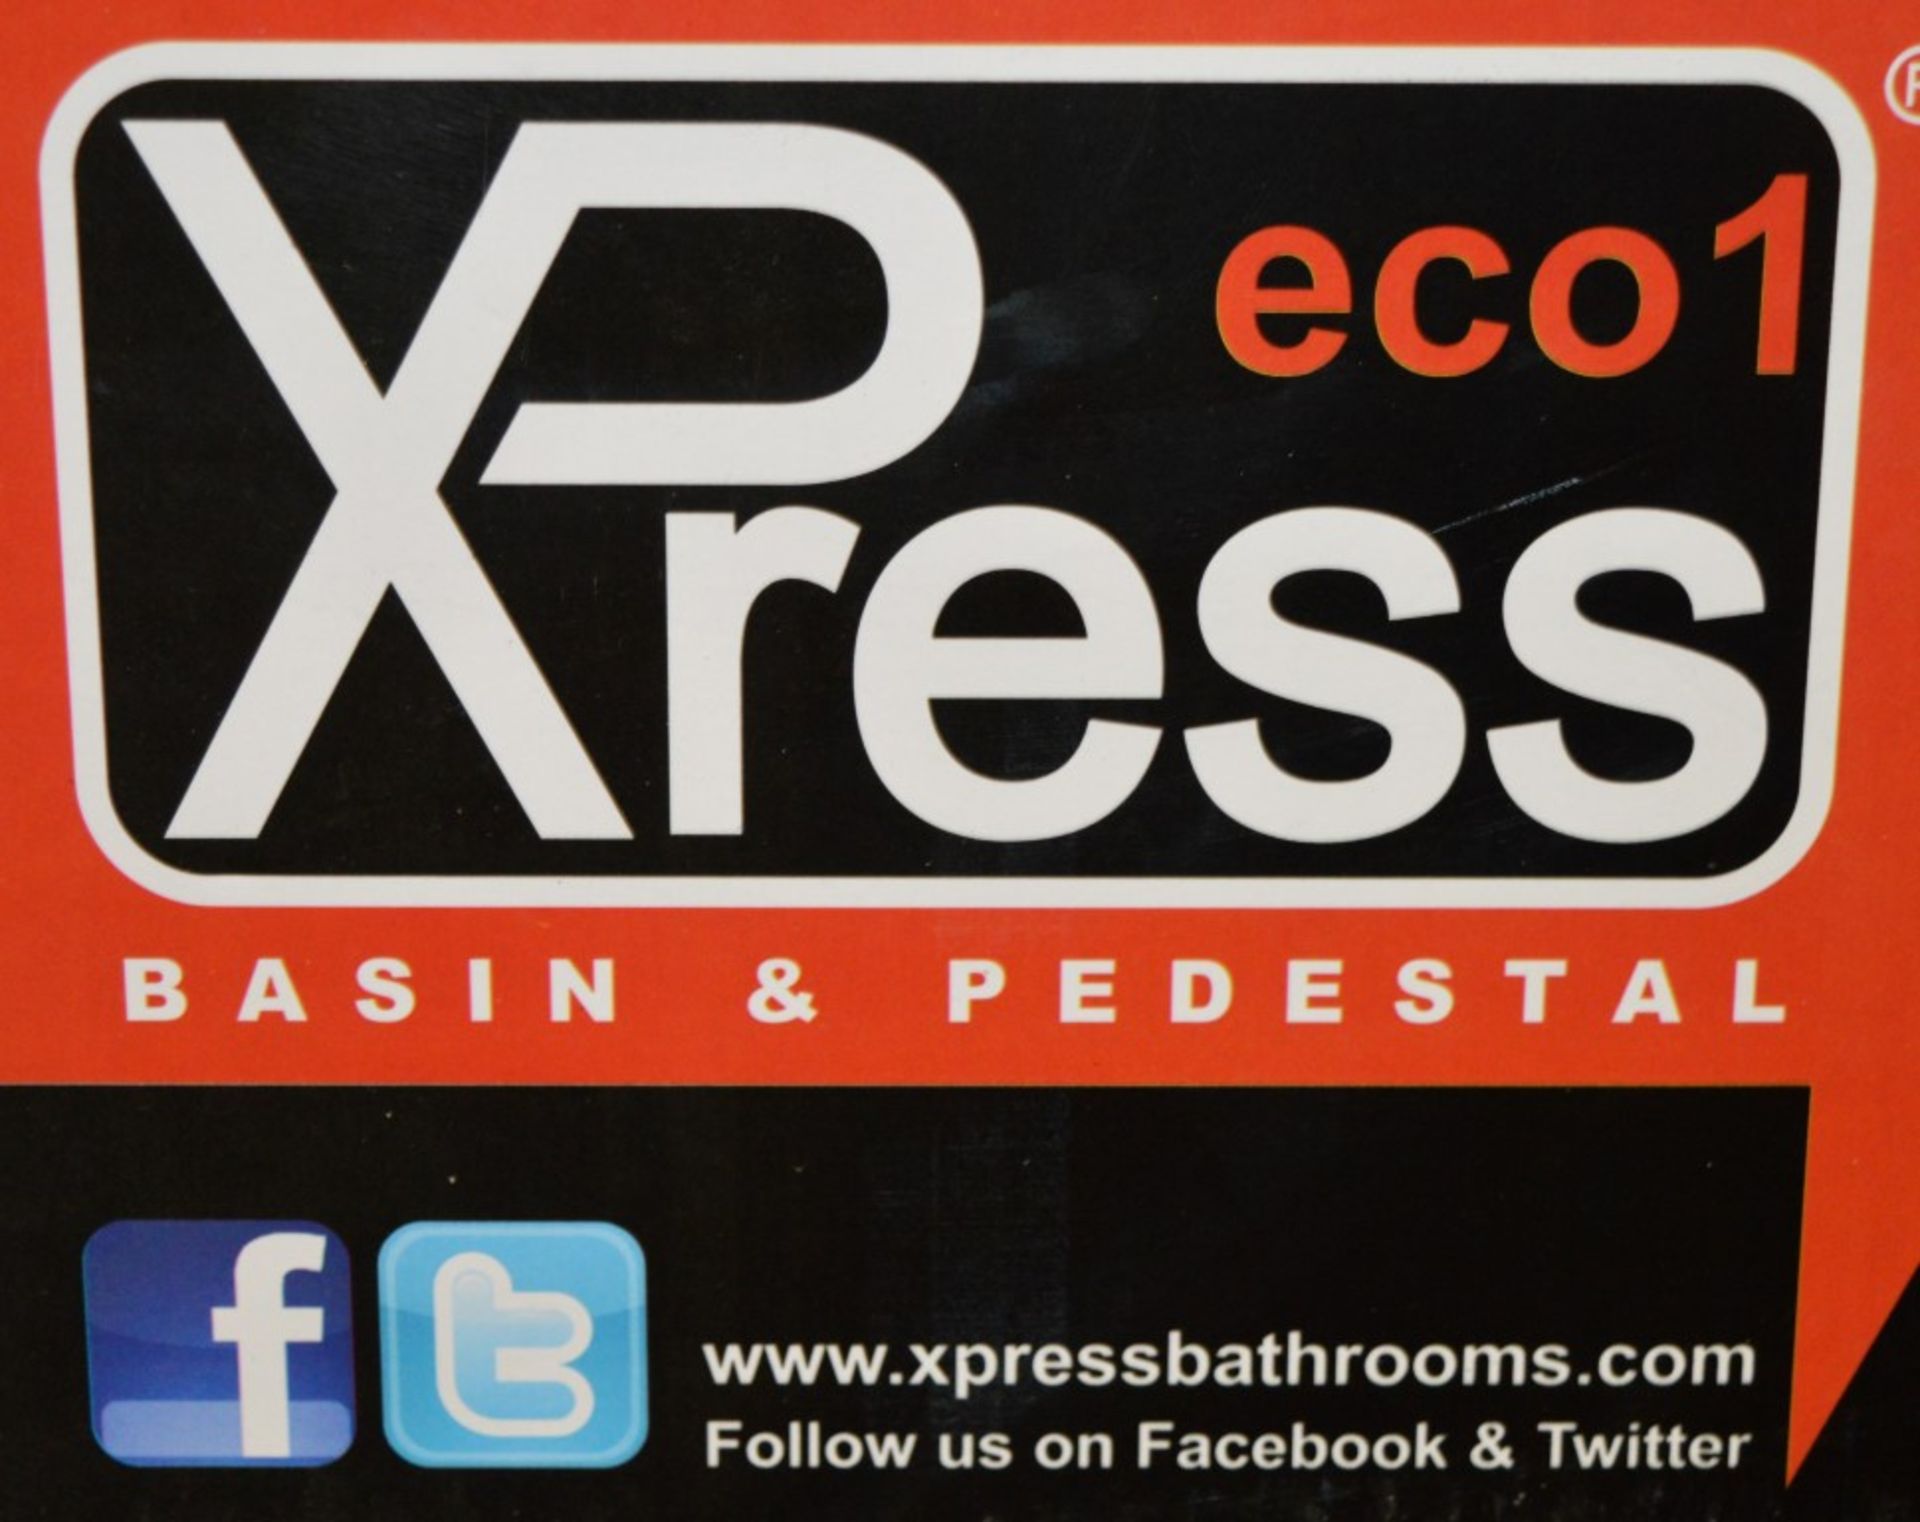 10 x Eco1 Xpress 2th 550mm Bathroom Sink Basin and Pedestal Sets - Brand New and Boxed - Sleek - Image 2 of 6